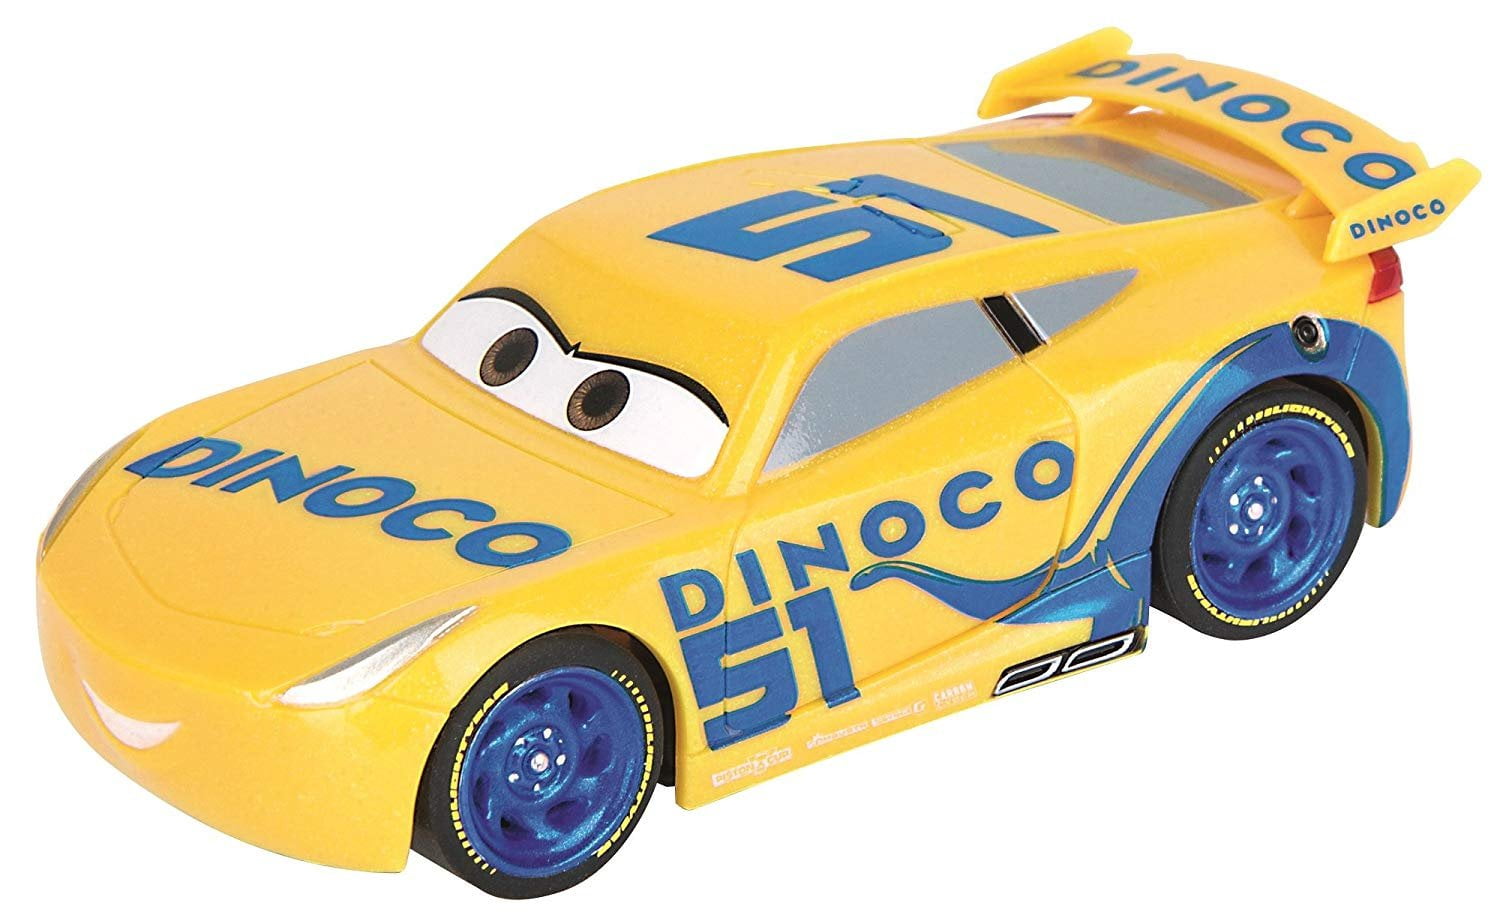 Carrera First Disney/Pixar Cars 3 - Slot Car Race Track - Includes 2 cars:  Lightning McQueen and Dinoco Cruz - Battery-Powered Beginner Racing Set for  Kids Ages 3 Years and Up 